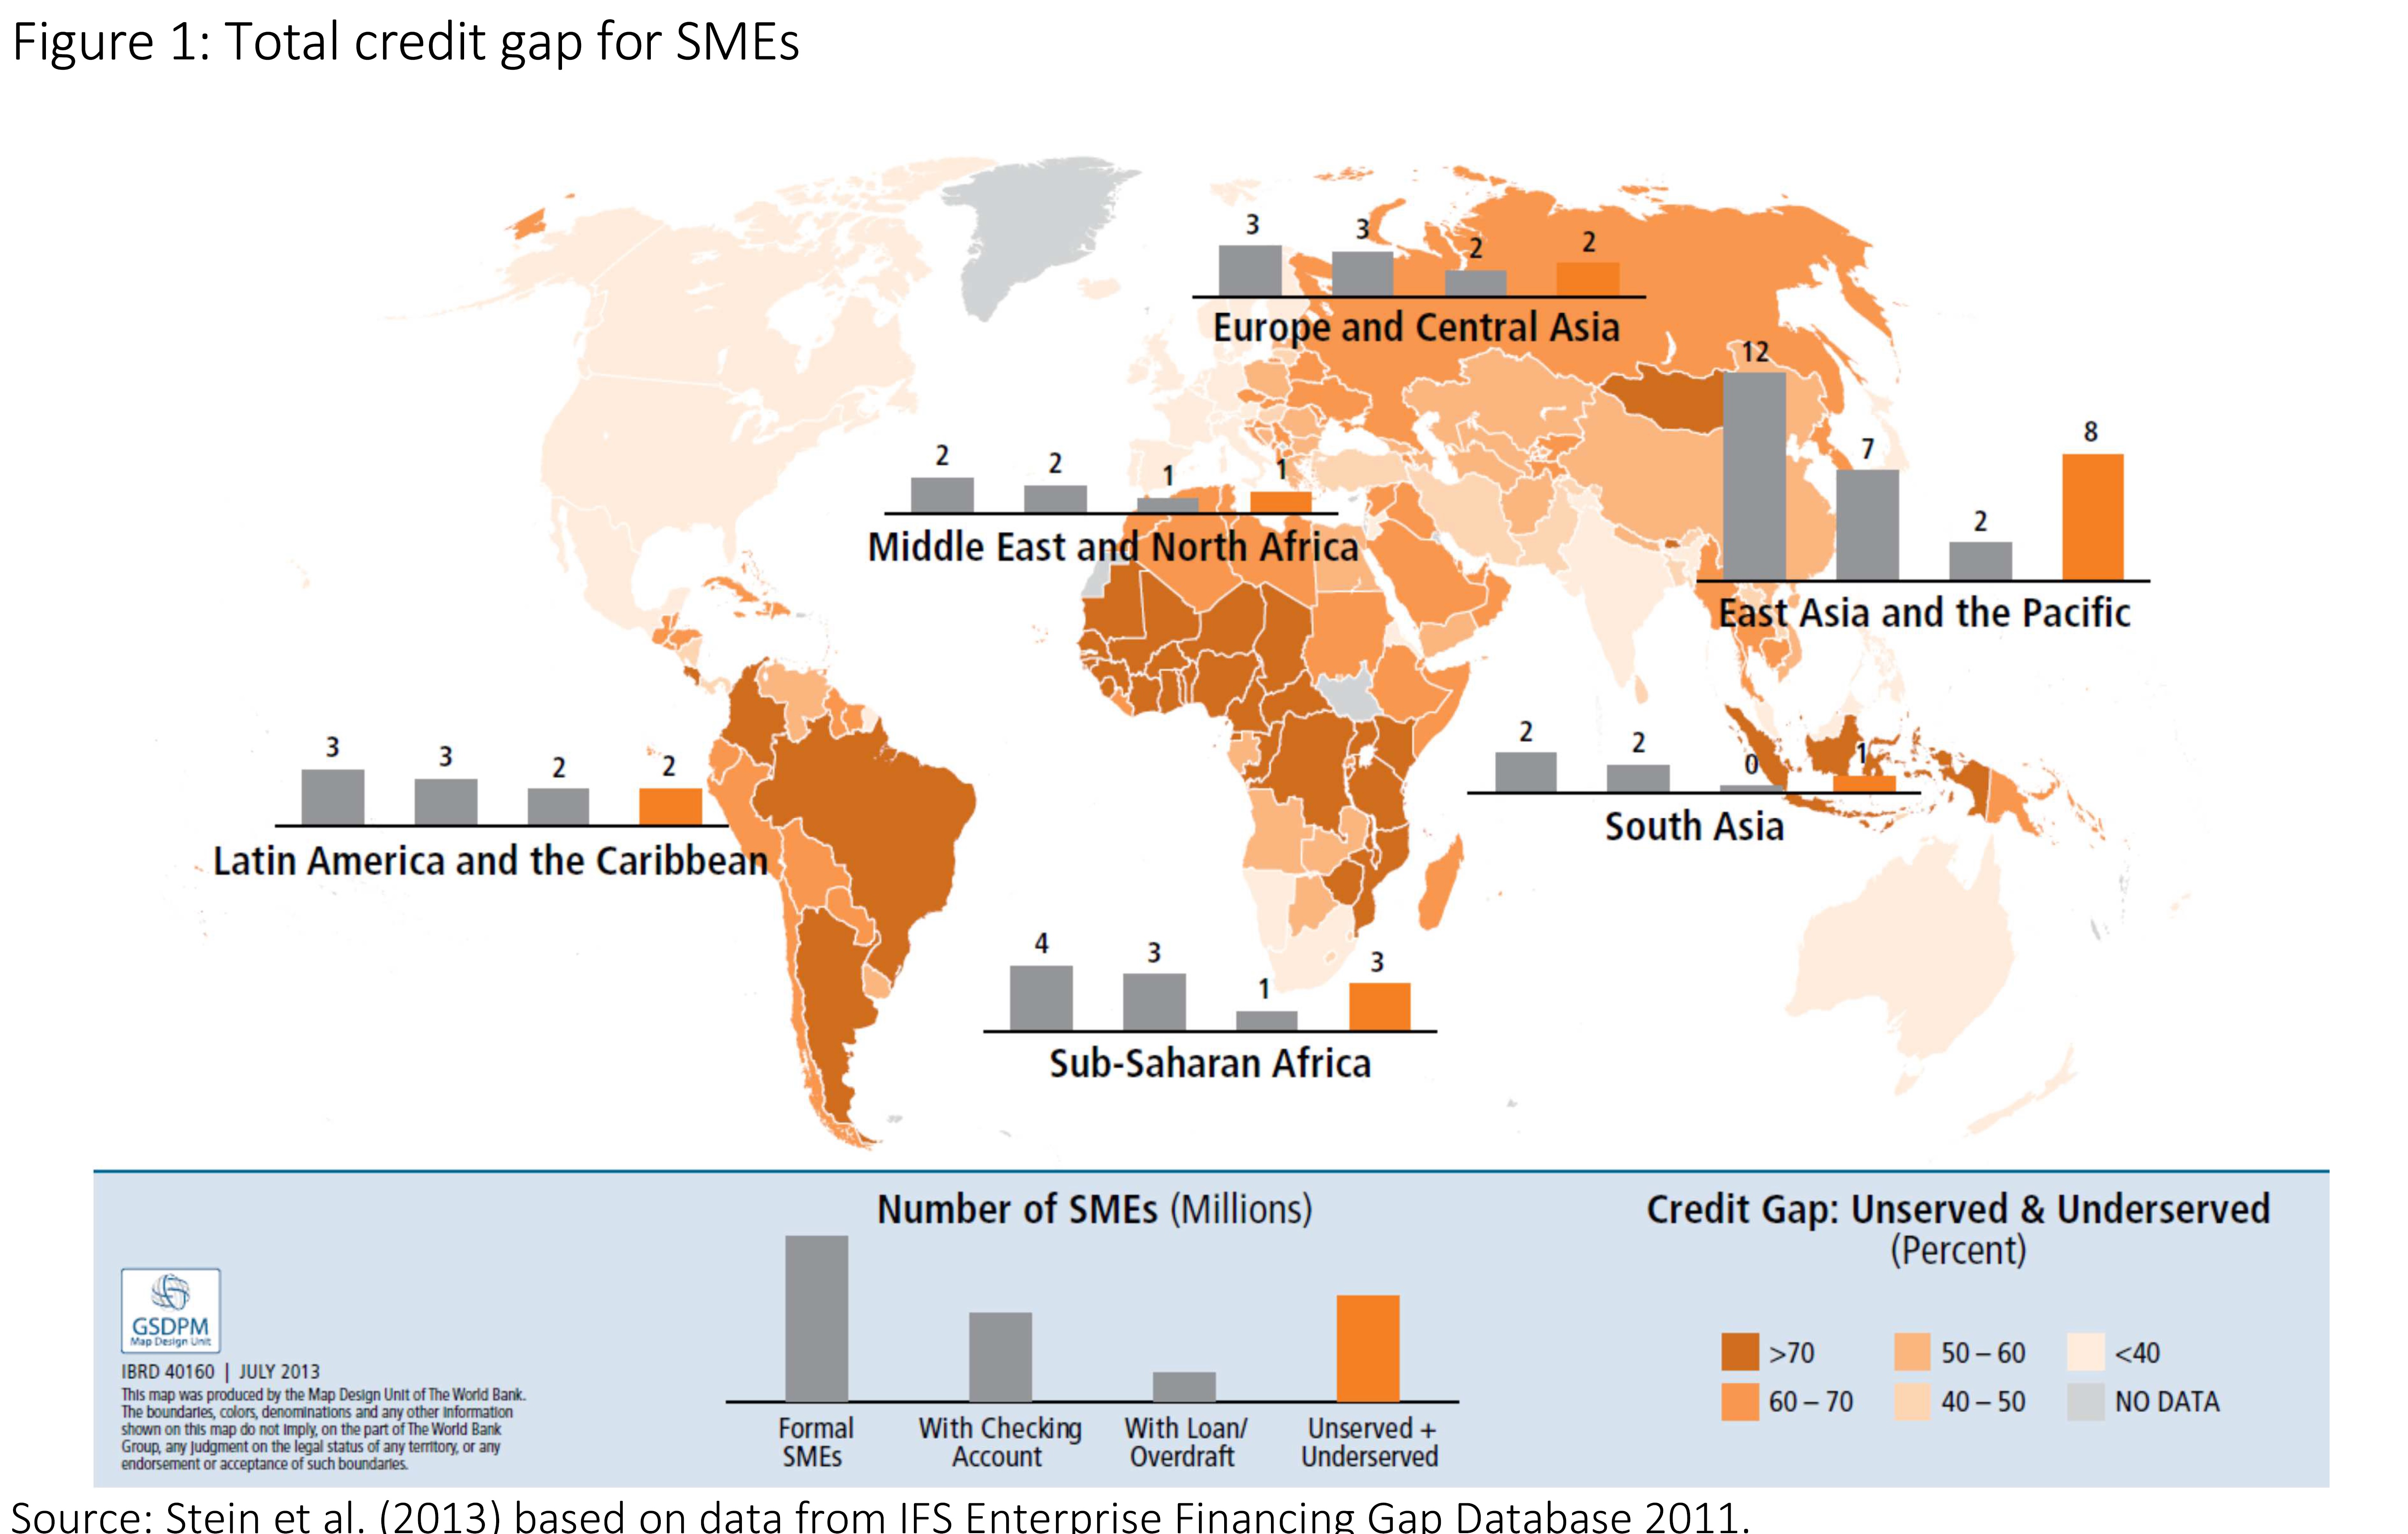 world map with credit gap for SMEs